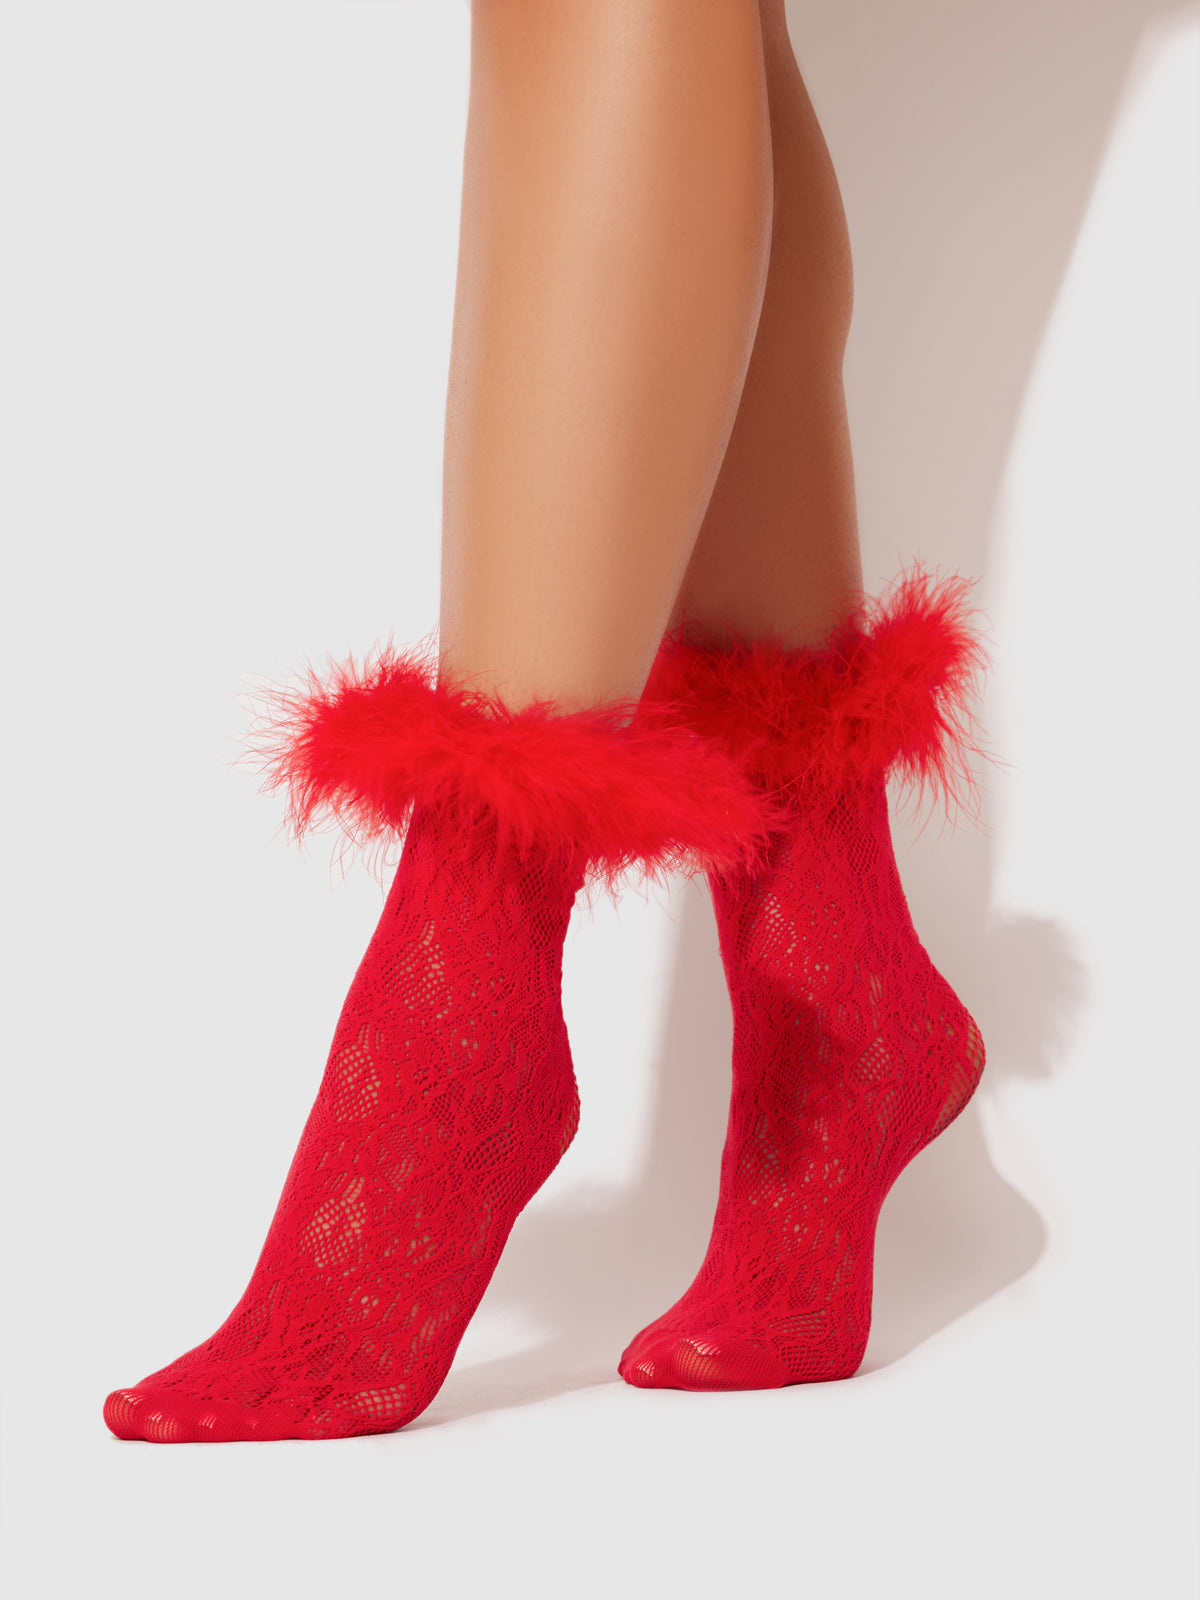 Feathered Floral Fishnet Socks - Jester Red